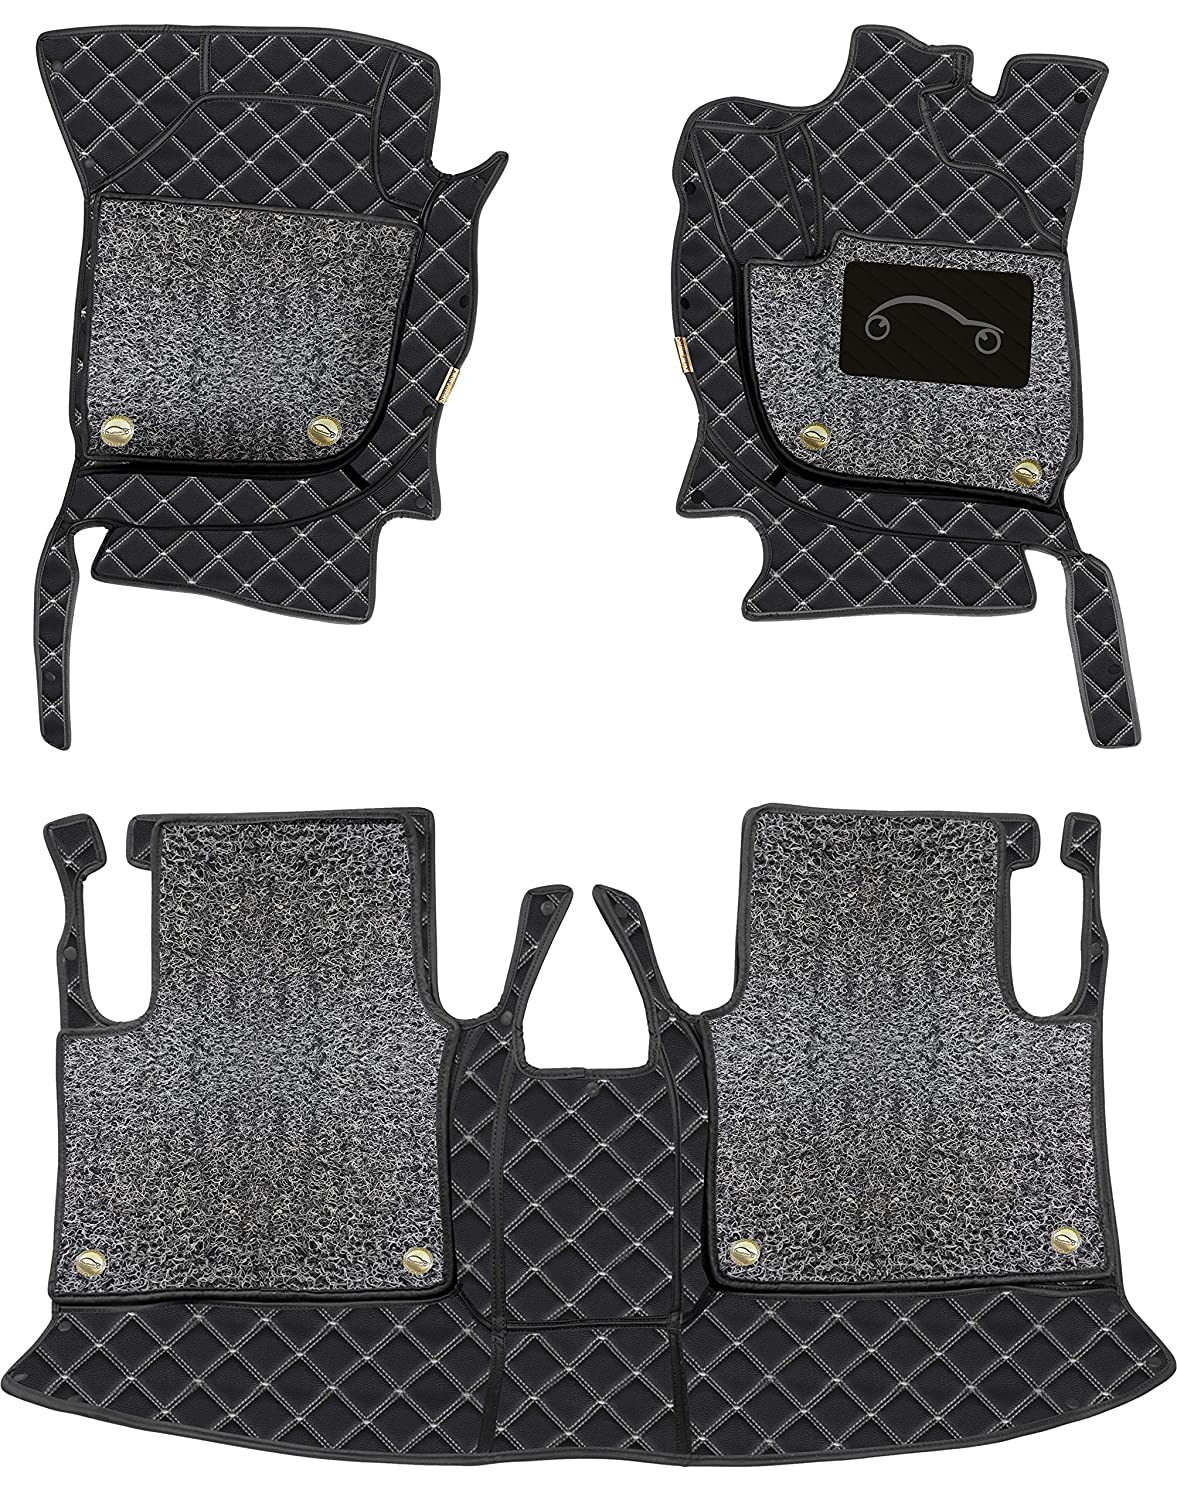 Mercedes GLE 43 AMG 2021 7D Luxury Car Mat, All Weather Proof, Anti-Skid, 100% Waterproof & Odorless with Unique Diamond Fish Design (24mm Luxury PU Leather, 2 Rows)